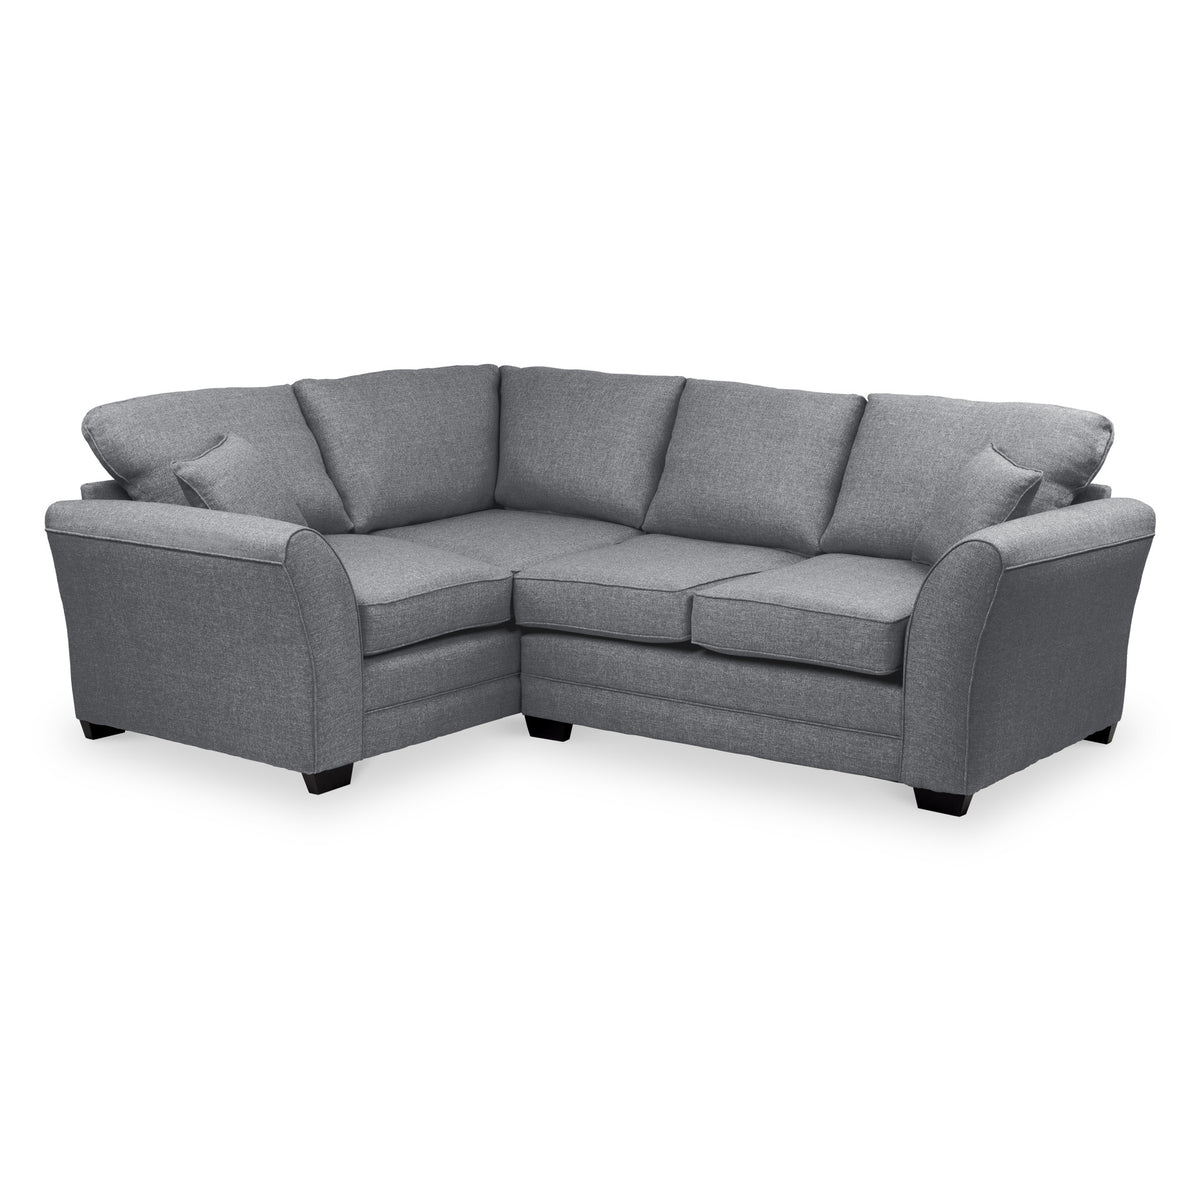 St Ives Corner Sofa in Charcoal by Roseland Furniture